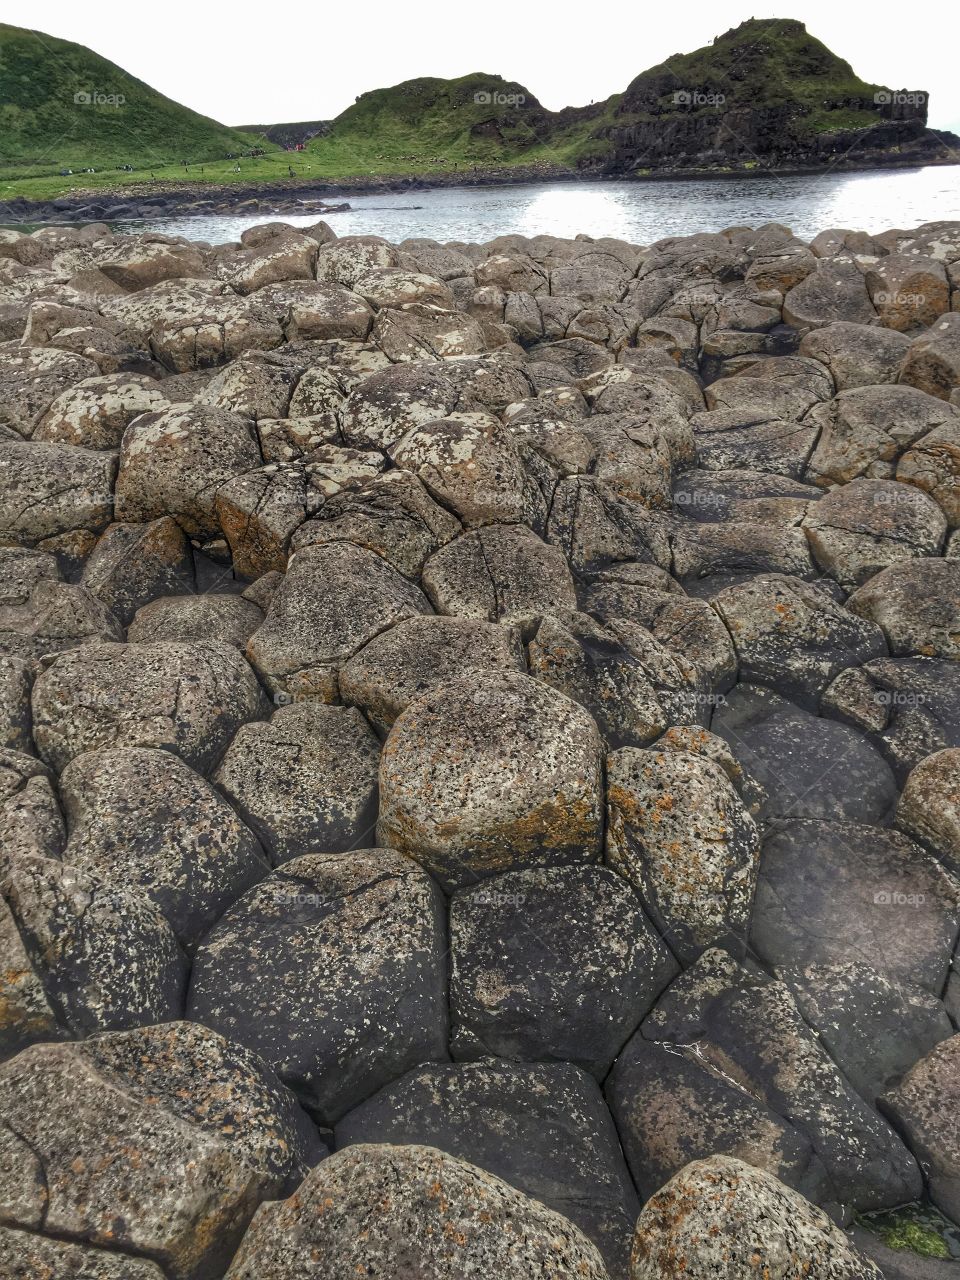 Rock n Roll. The Giant's Causeway in Northern Ireland